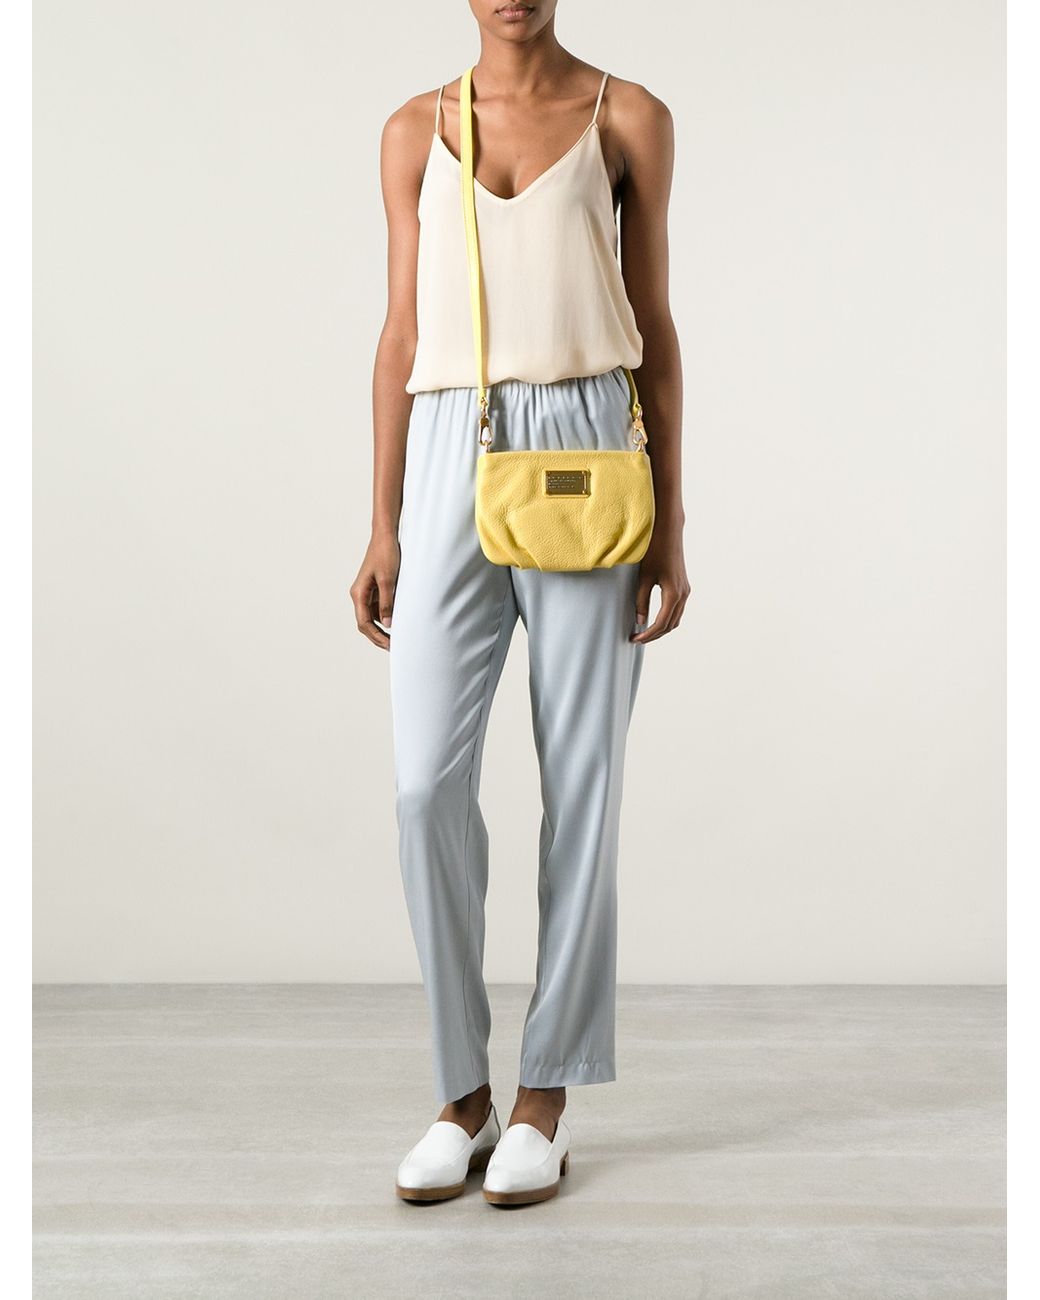 Marc By Marc Jacobs Classic Q Percy Crossbody Bag in Yellow | Lyst